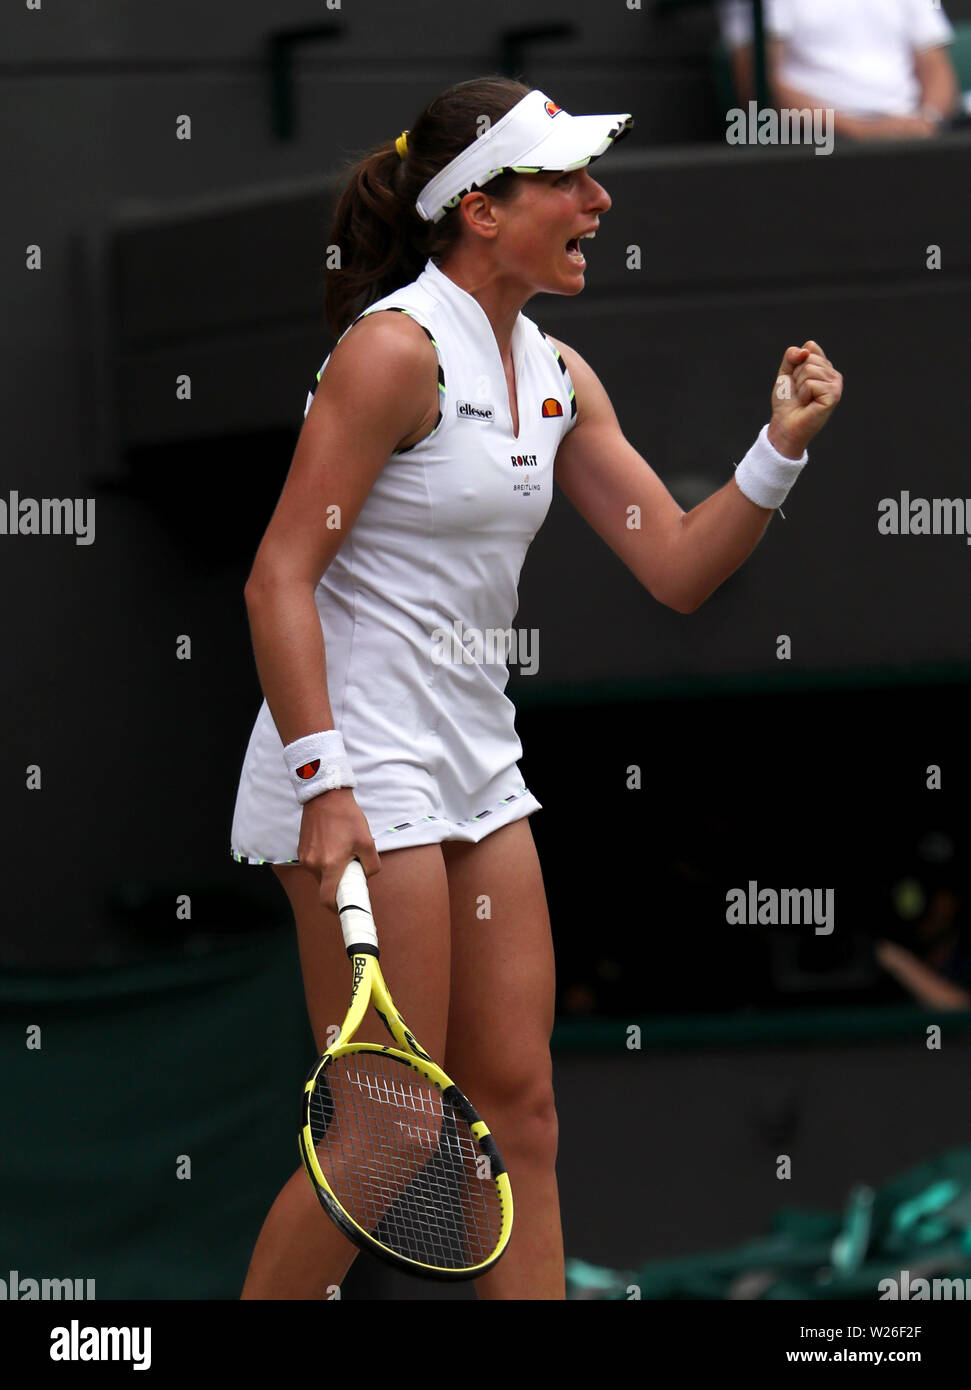 Wimbledon, 6 July 2019 - Johanna Konta of Great Britain celebrates a point during her victory over American Sloane Stephens in the third round match  at Wimbledon. Credit: Adam Stoltman/Alamy Live News Stock Photo